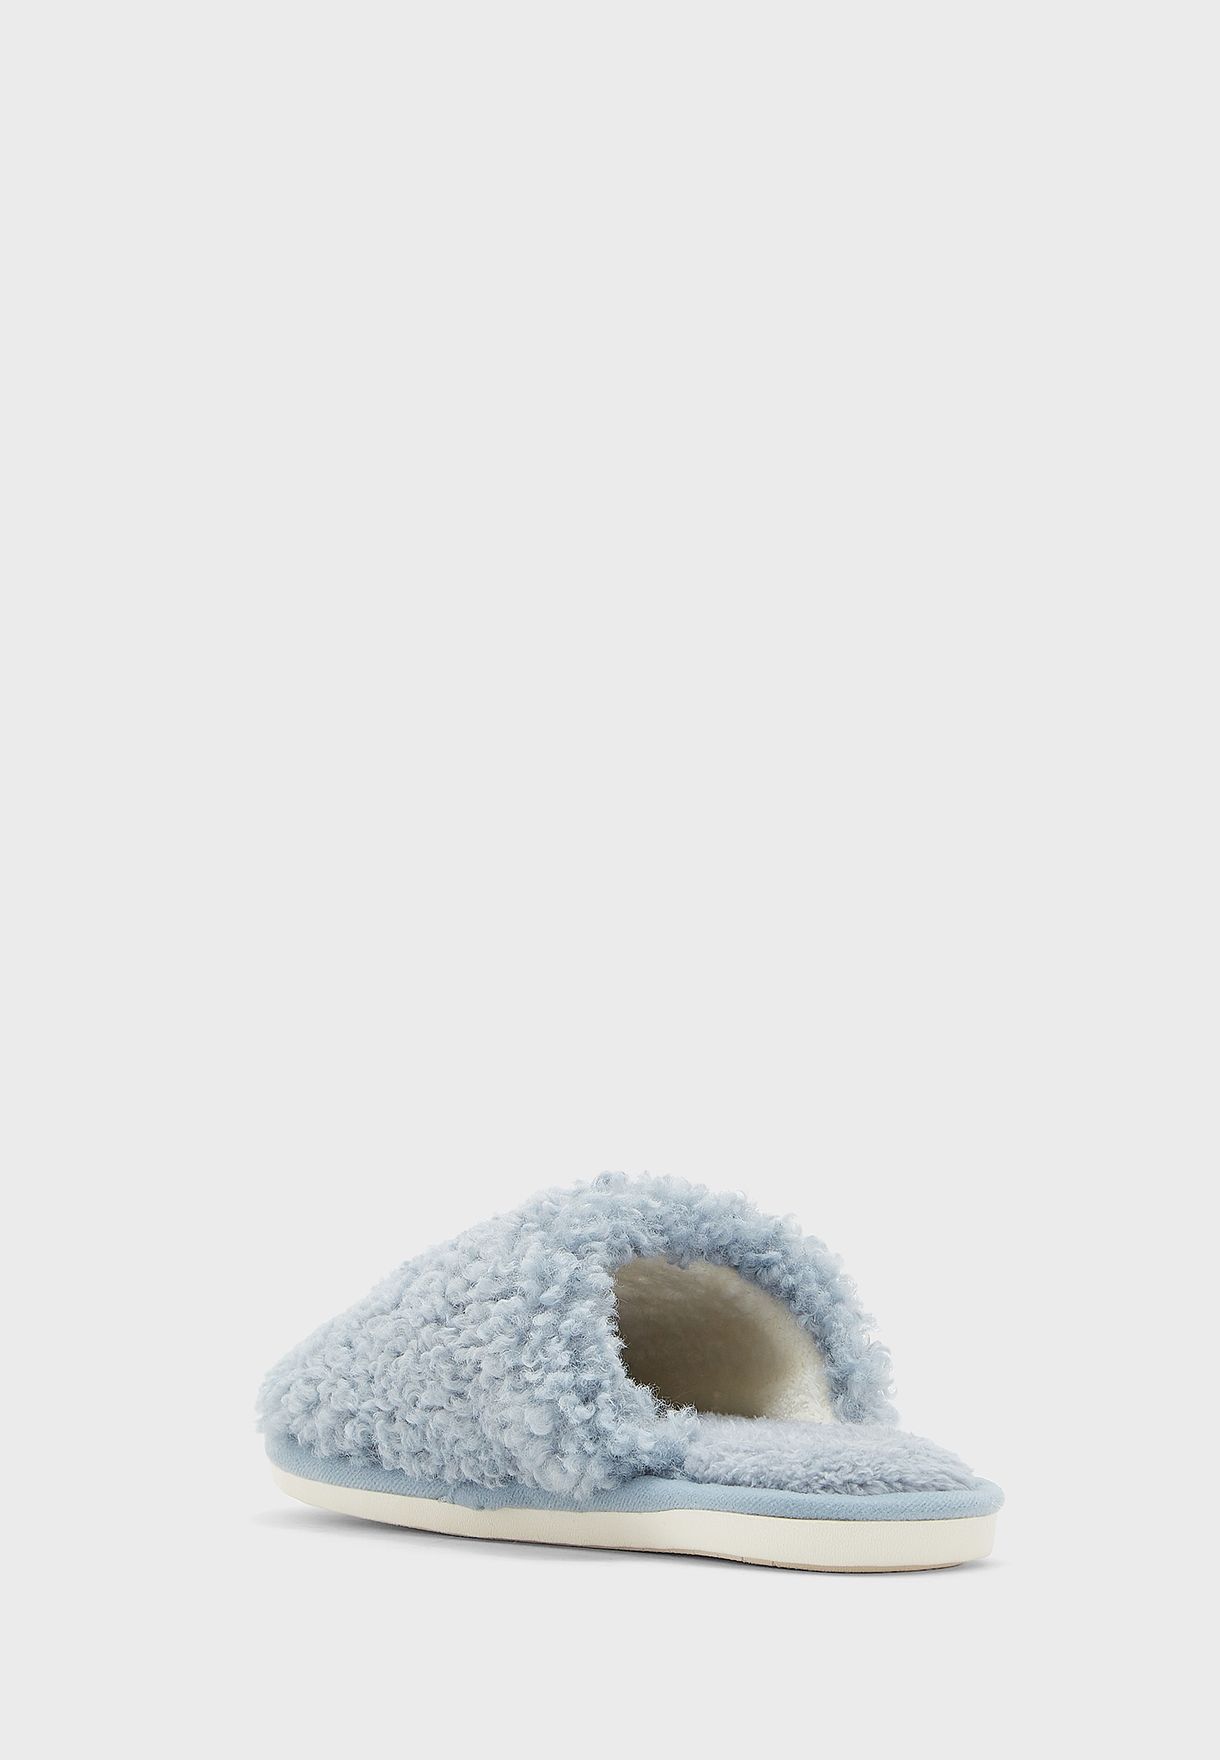 Wooly Bedroom Slippers, Eye Cover And Scrunchie Gift Set 